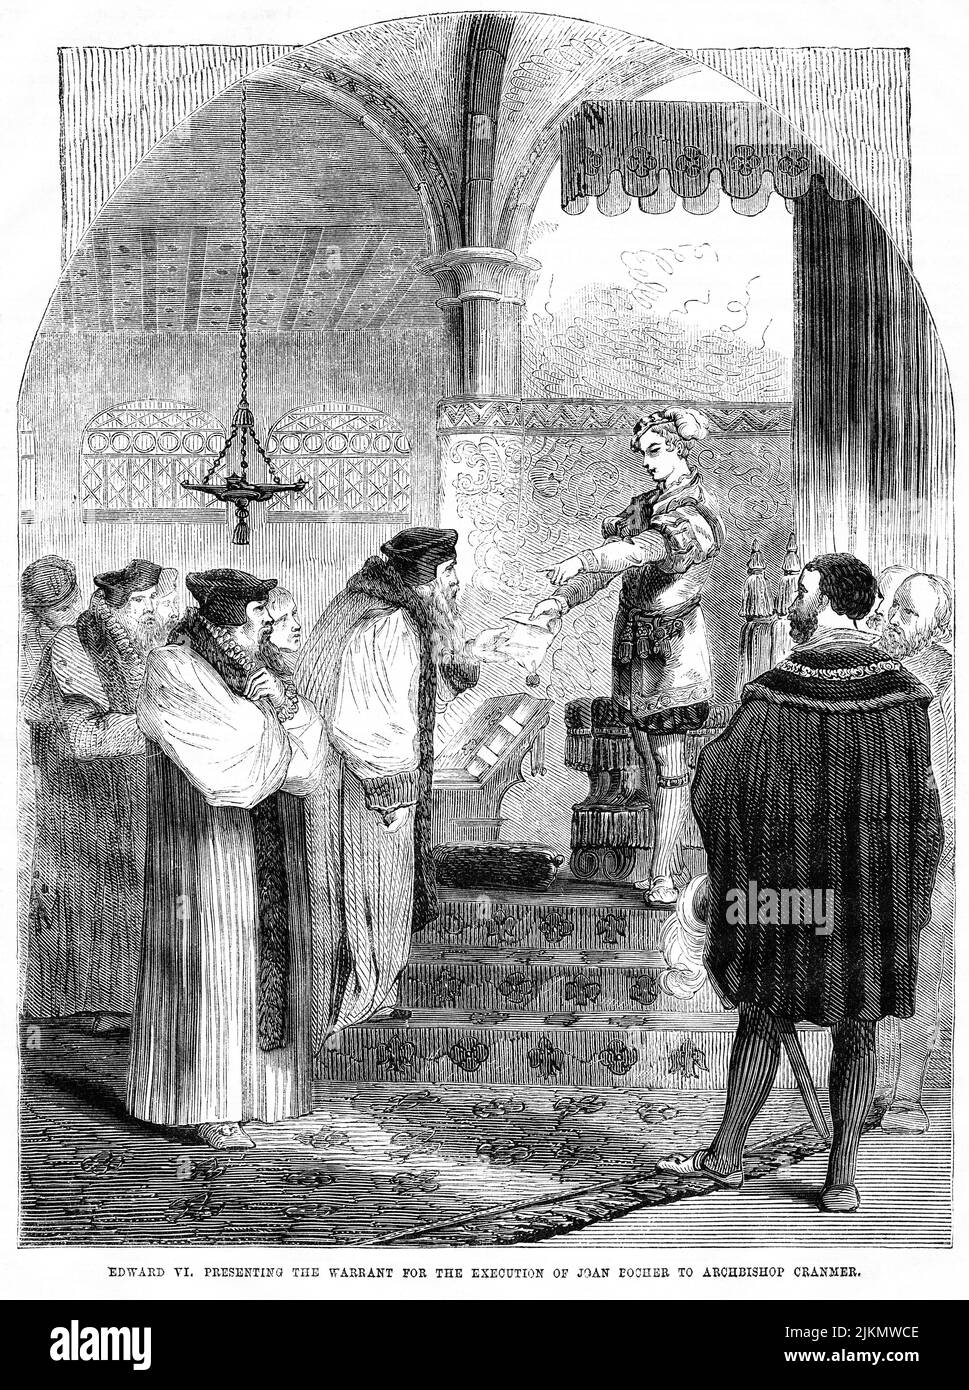 Edward VI presenting the Warrant for the Execution of Joan Bocher to Archbishop Cranmer, Illustration from the Book, 'John Cassel’s Illustrated History of England, Volume II', text by William Howitt, Cassell, Petter, and Galpin, London, 1858 Stock Photo